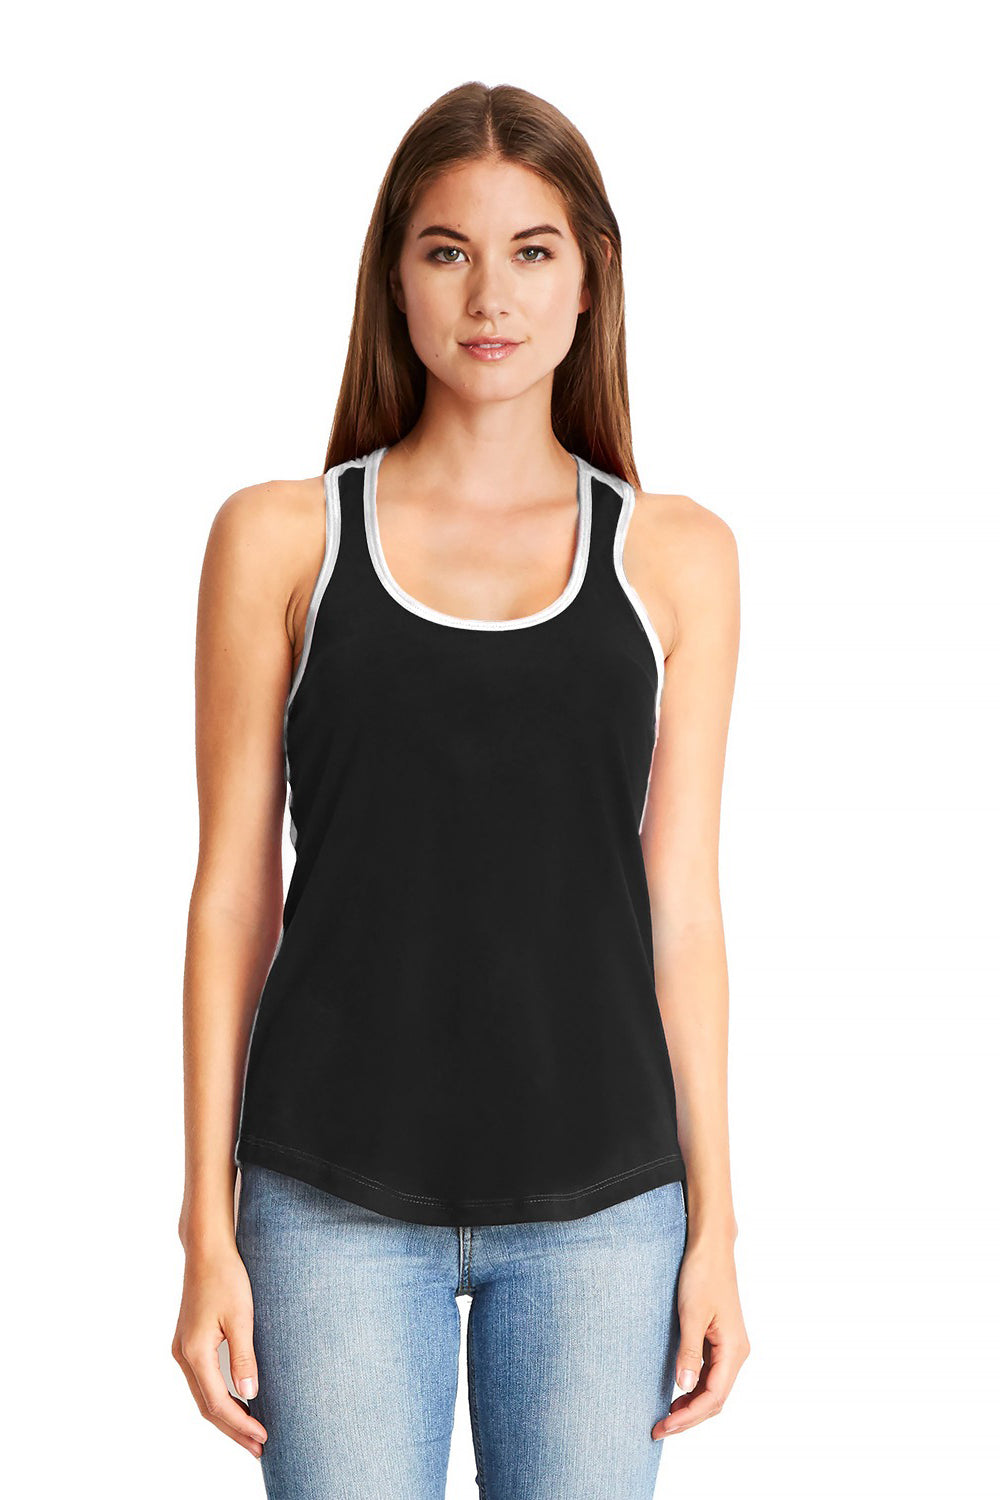 Next Level 1534 Womens Ideal Tank Top Black/White Front